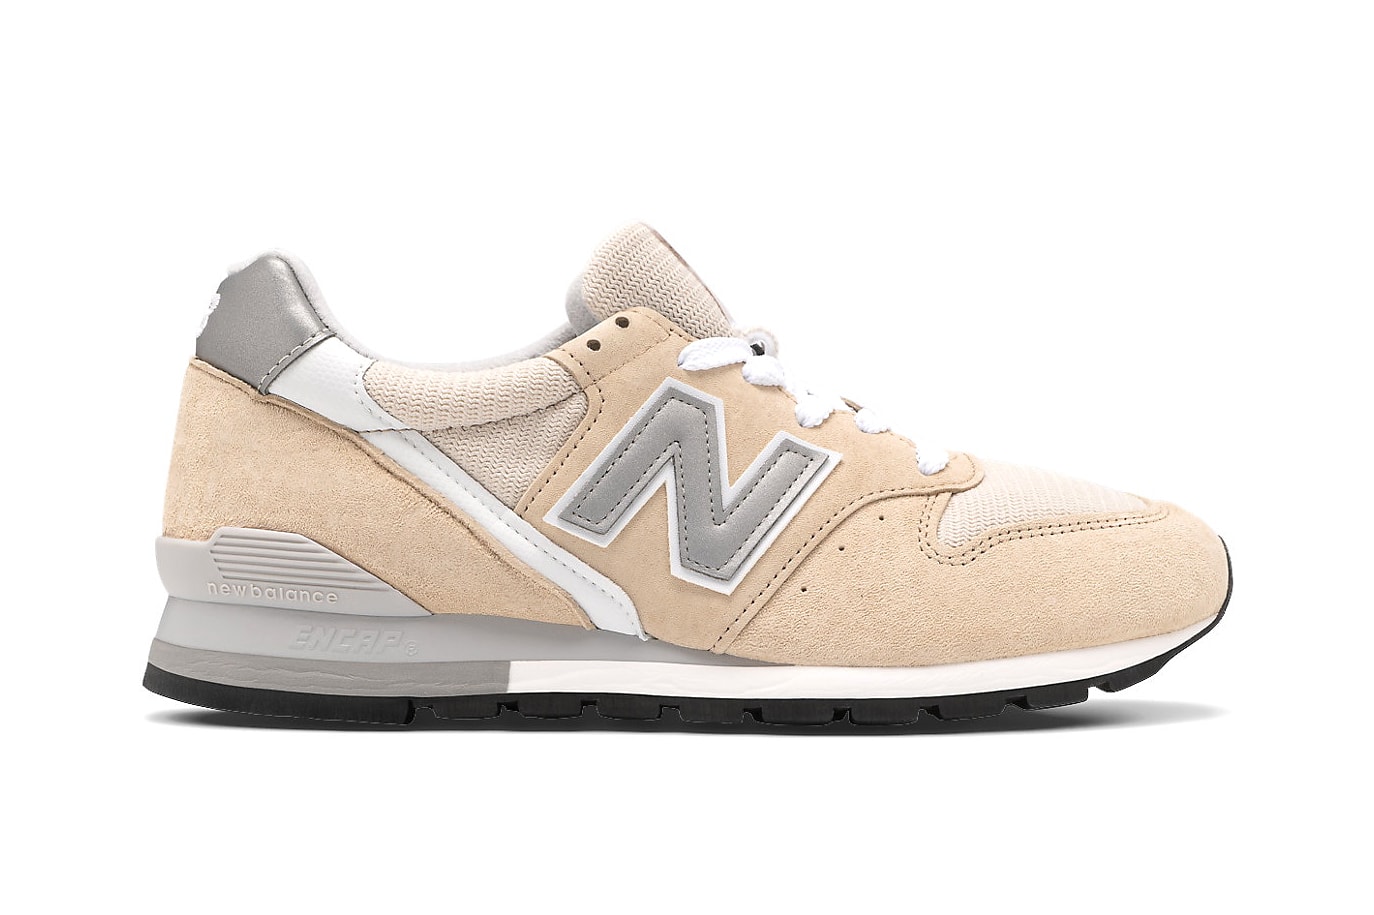 New Balance 996 in Tan white M996CRC sneakers shoes